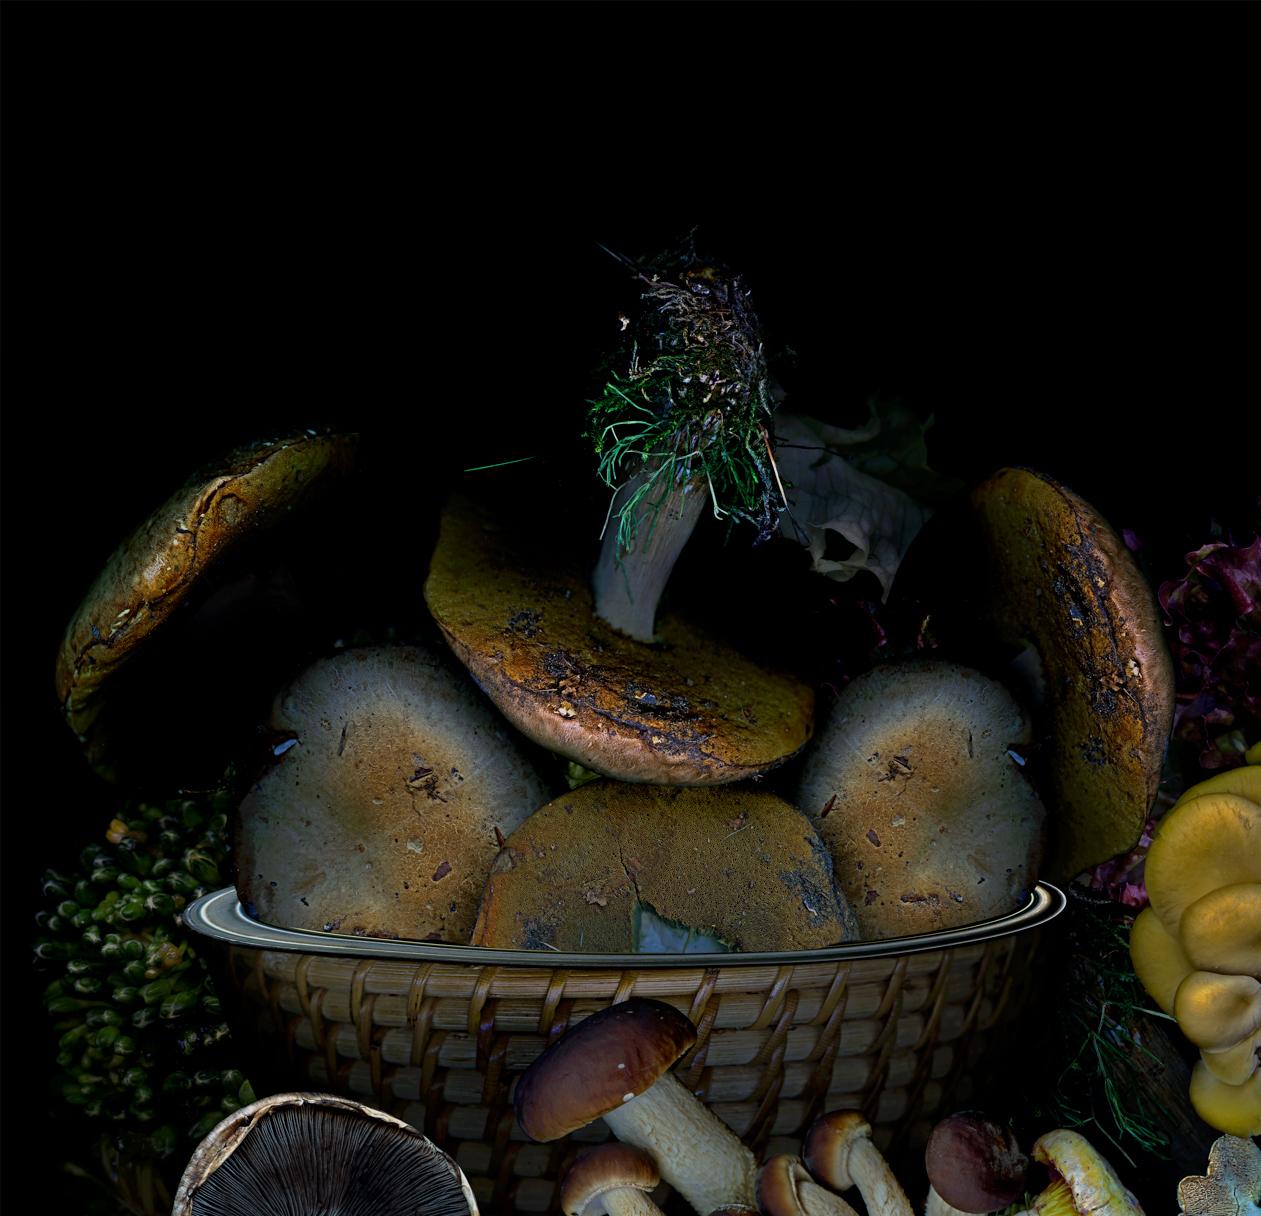 Vegetables from my garden #3 by Zoltan Gerliczki
From the Vegetables from my garden series
Archival Pigment Print 
Image size: 39 in H x 48 in W.
Edition of 9 + 2AP
Unframed
2021

